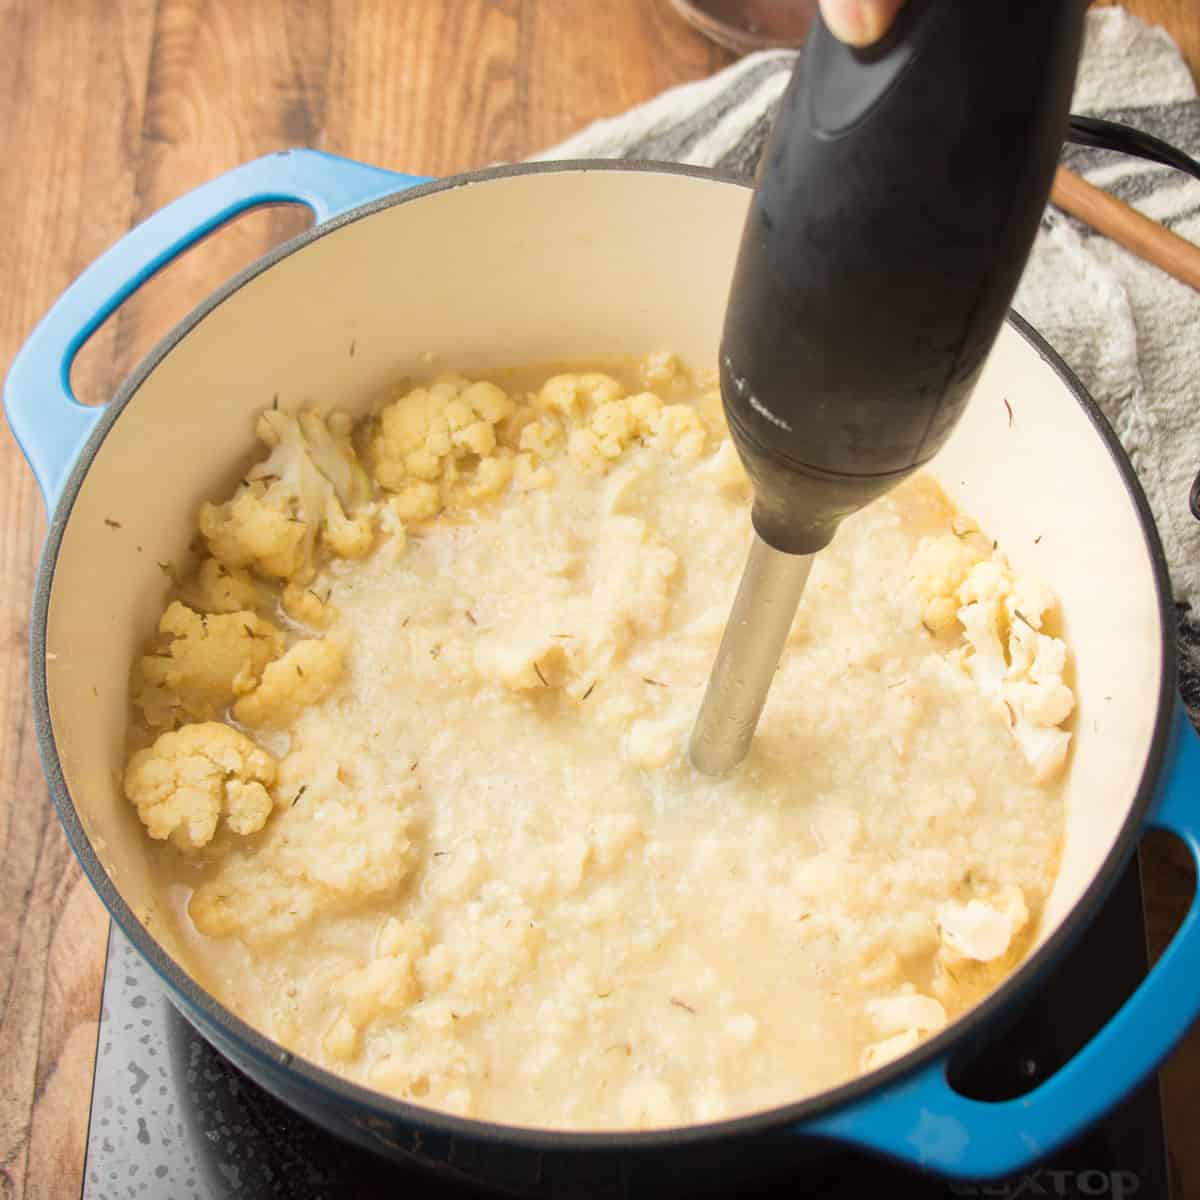 Pot of Vegan Cauliflower Soup being blended with an immersion blender.